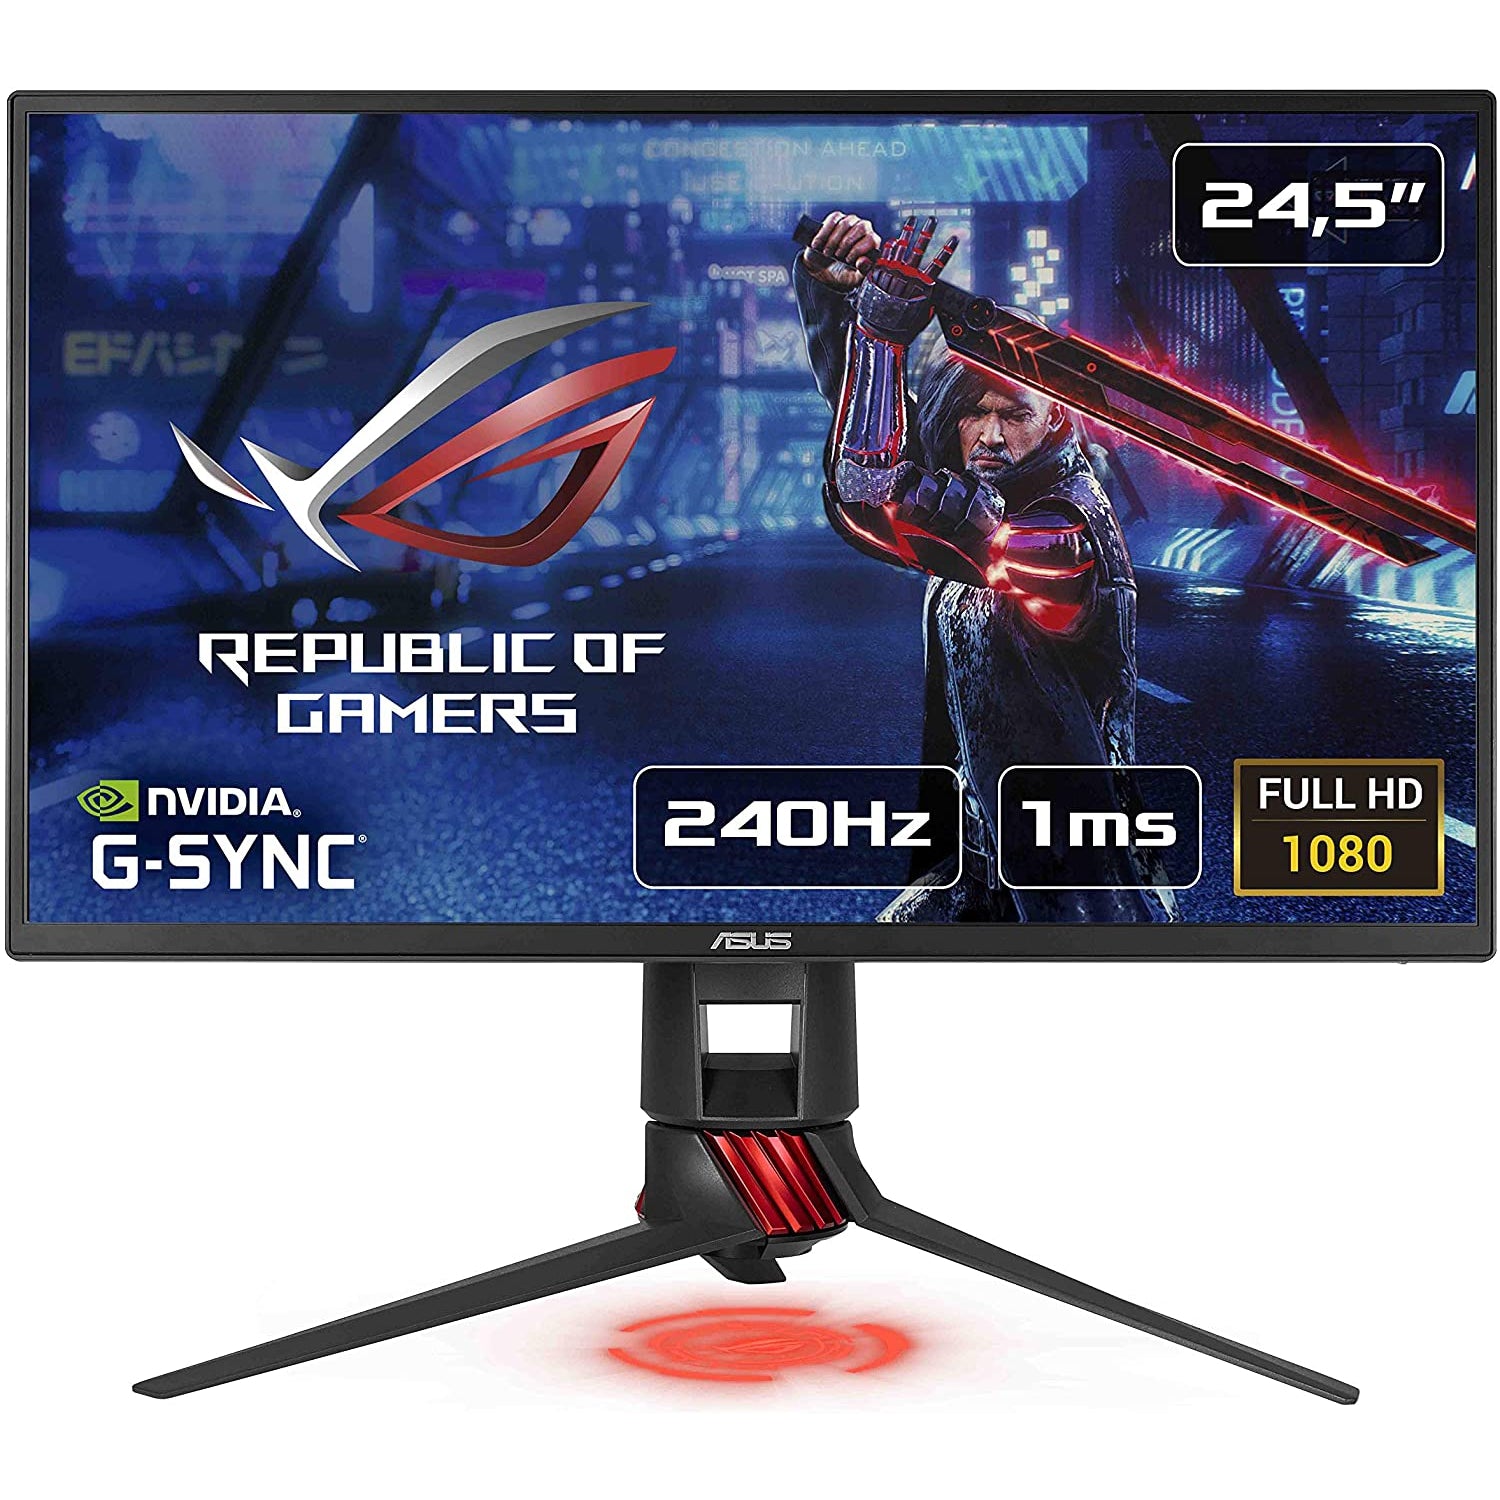 Asus ROG Strix XG258Q 24.5" LED 1ms 240Hz Gaming Monitor *Scratches on Screen*